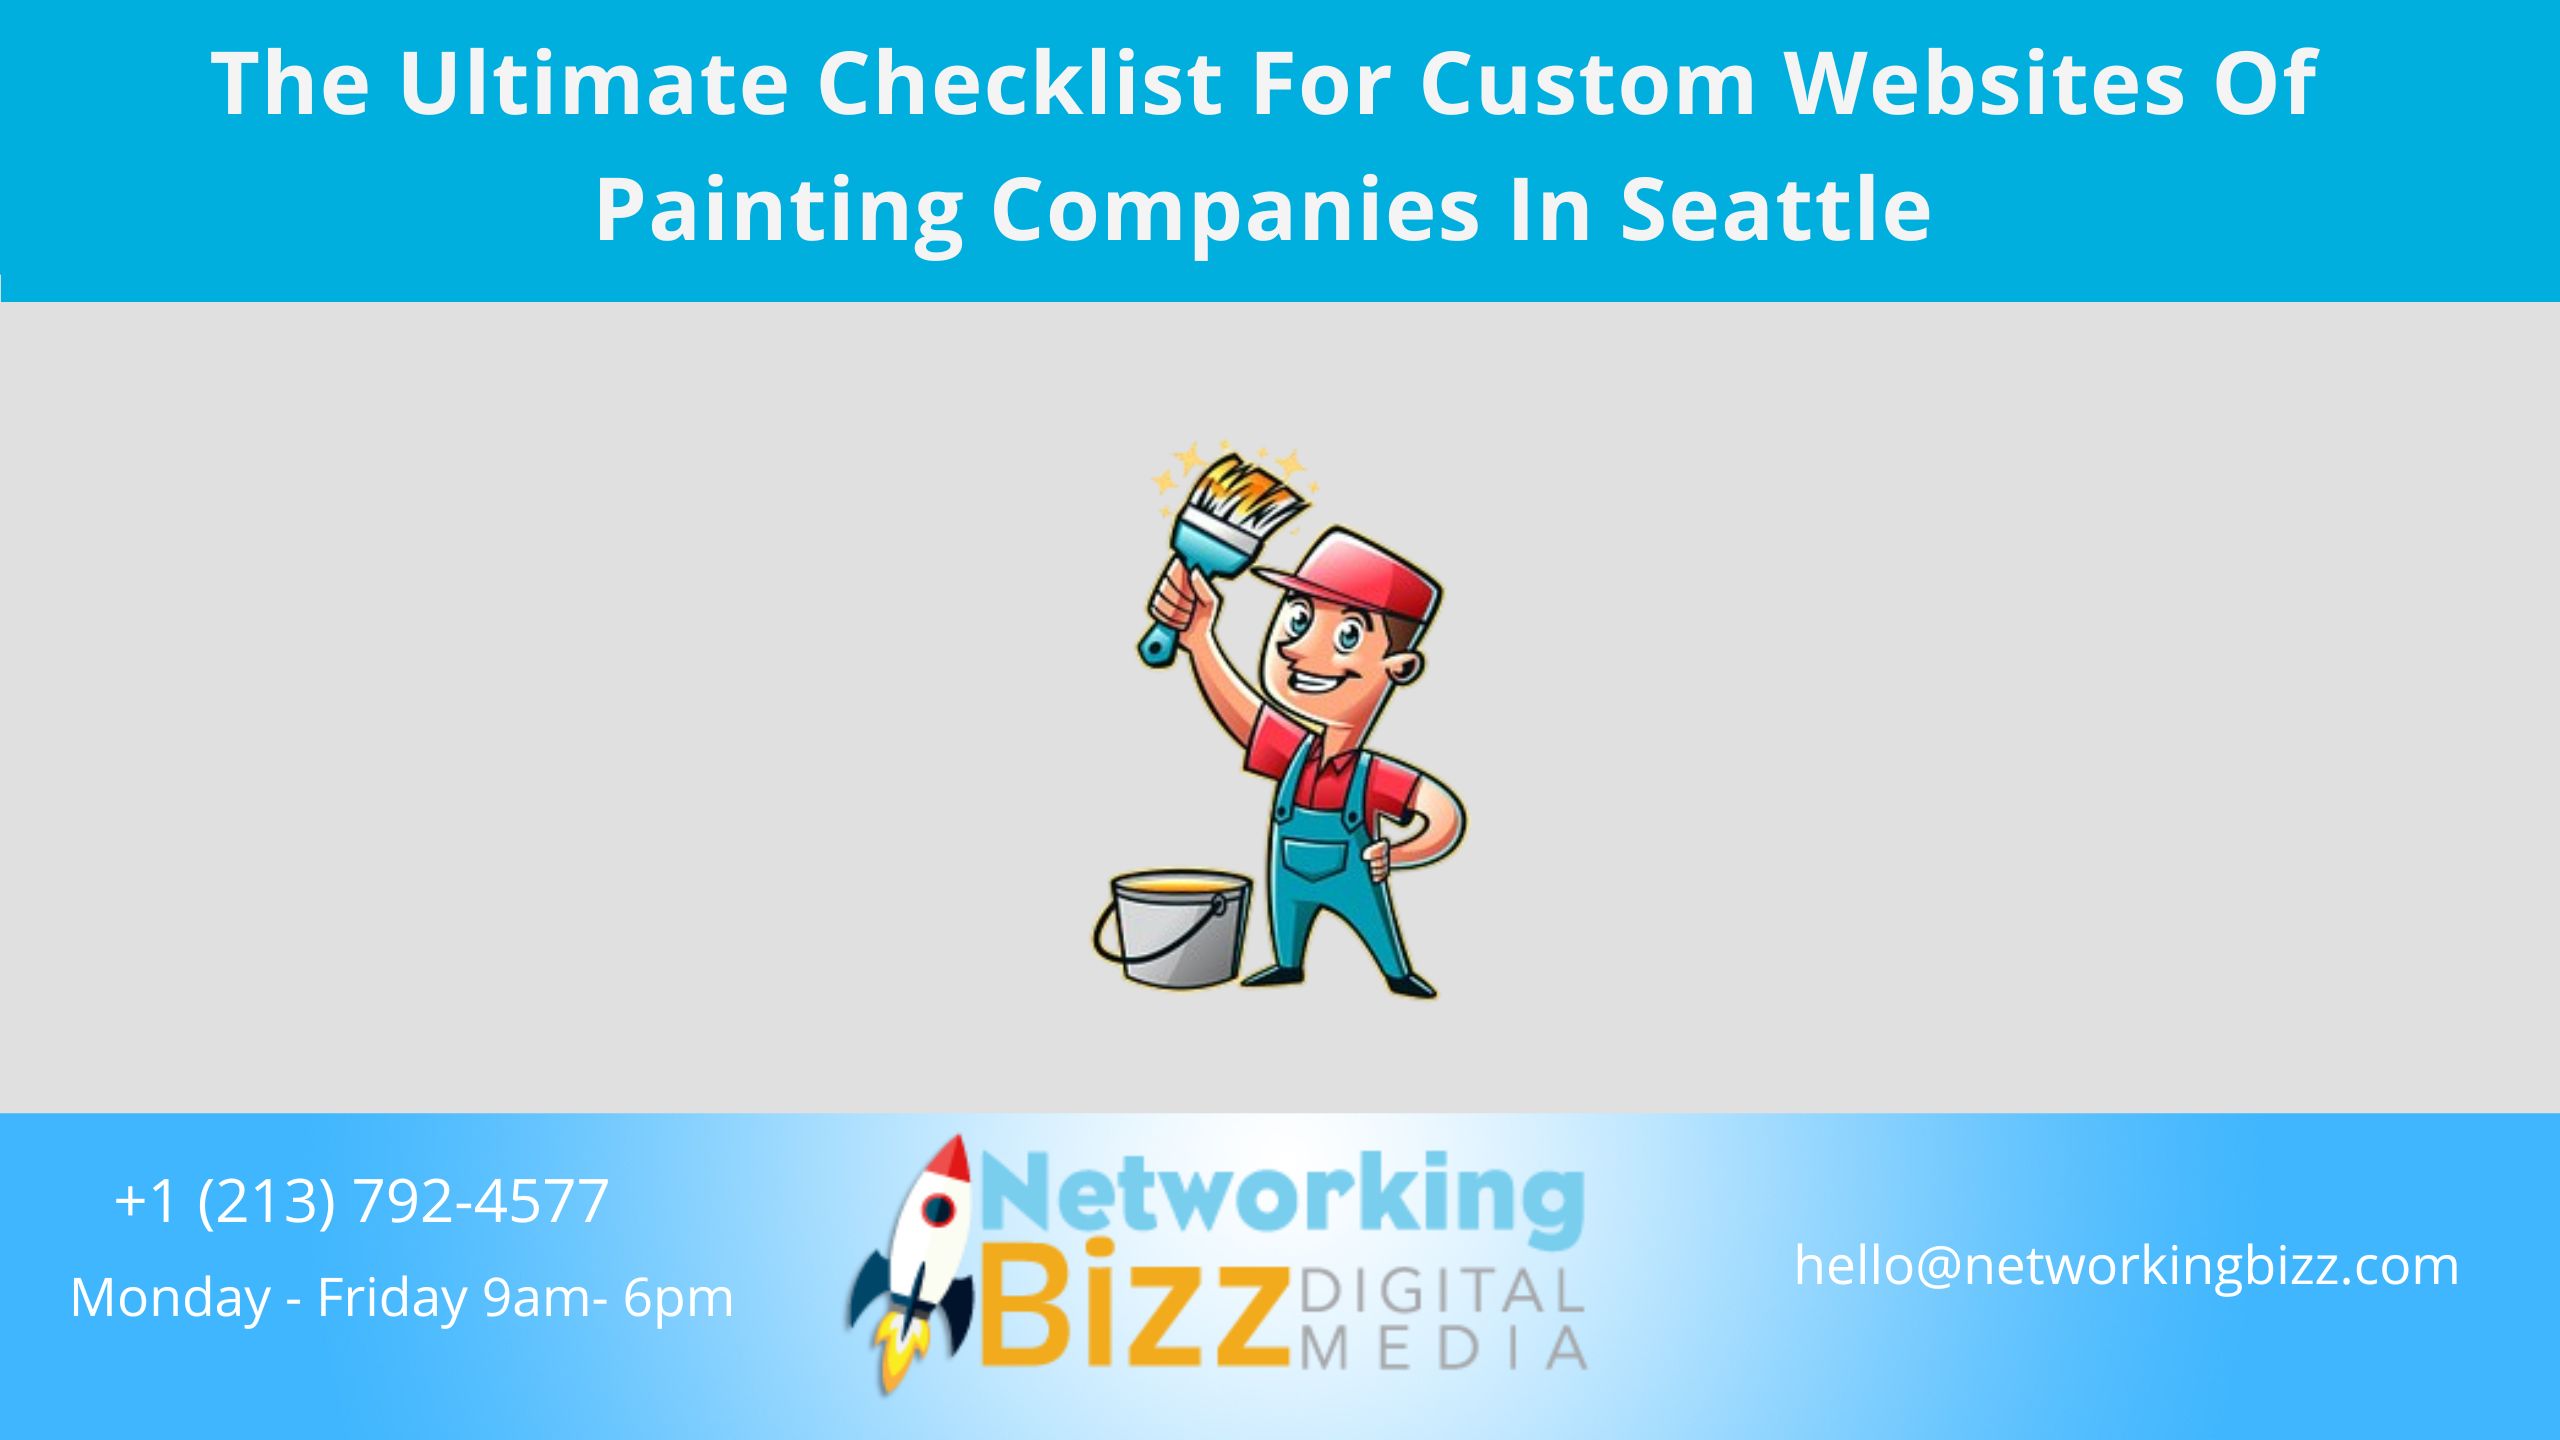 The Ultimate Checklist For Custom Websites Of Painting Companies In Seattle